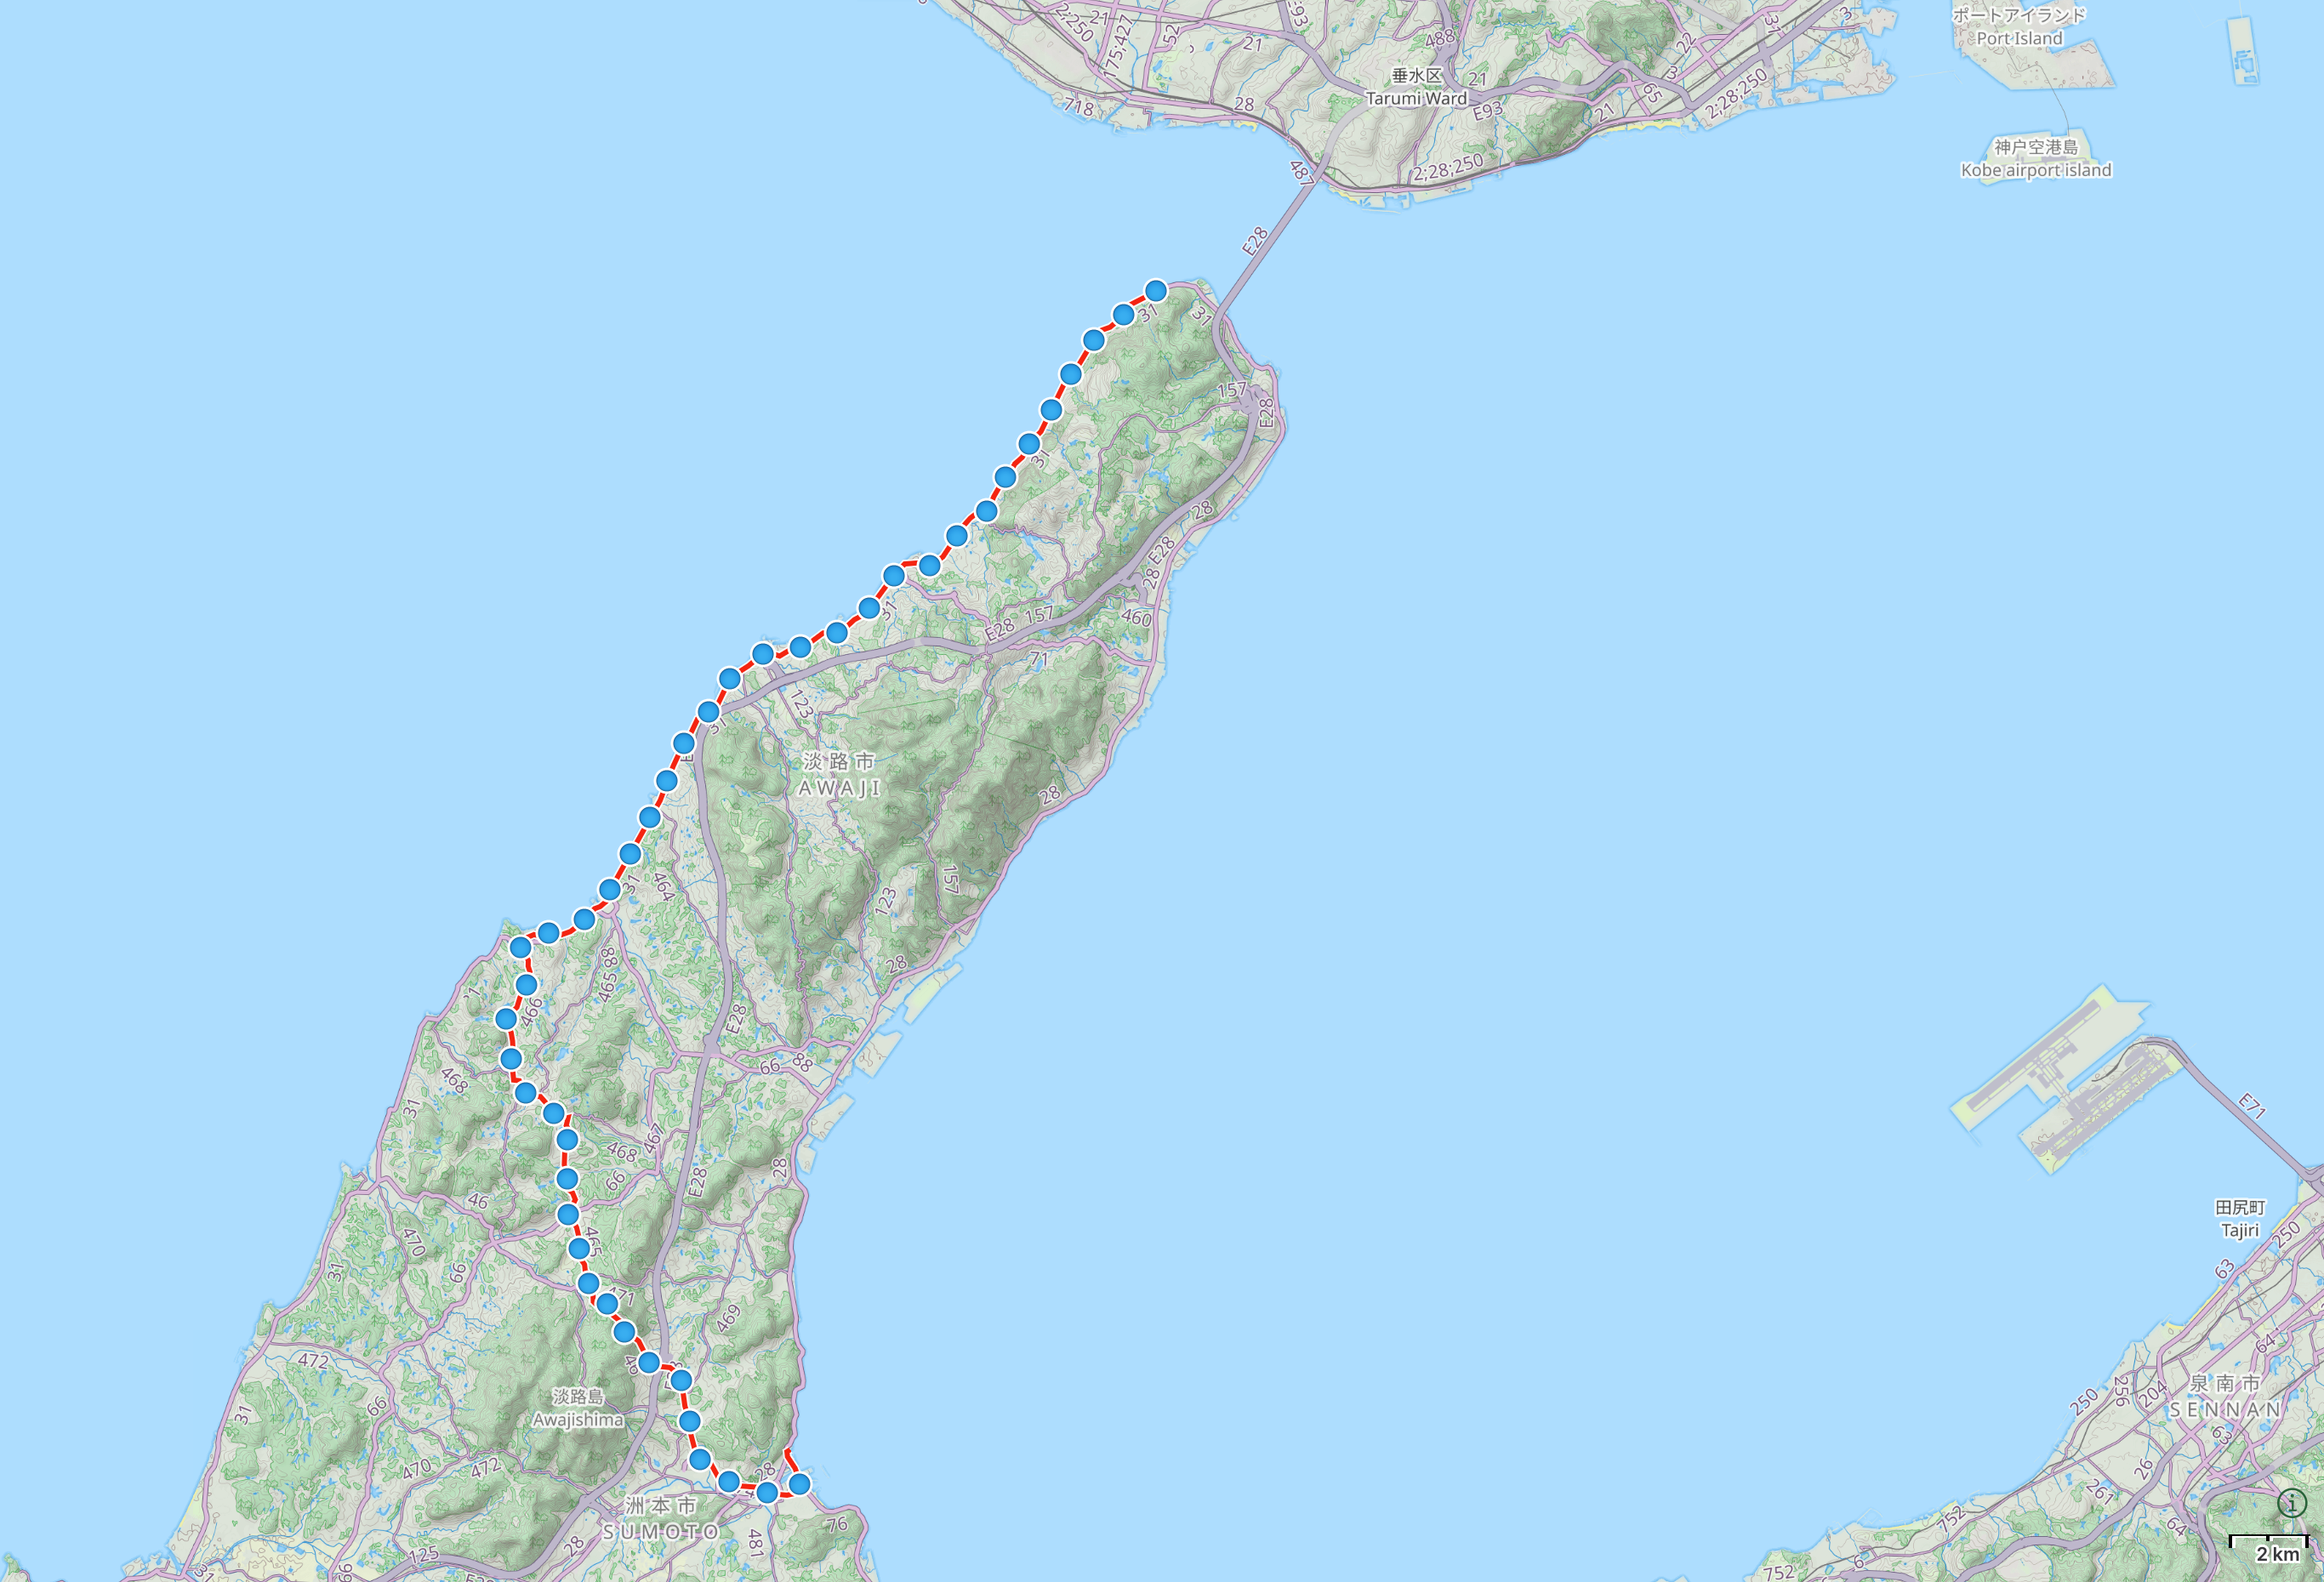 Map of Awaji Island in Hyōgo Prefecture with author’s route between Sumoto and the Esaki Lighthouse highlighted.